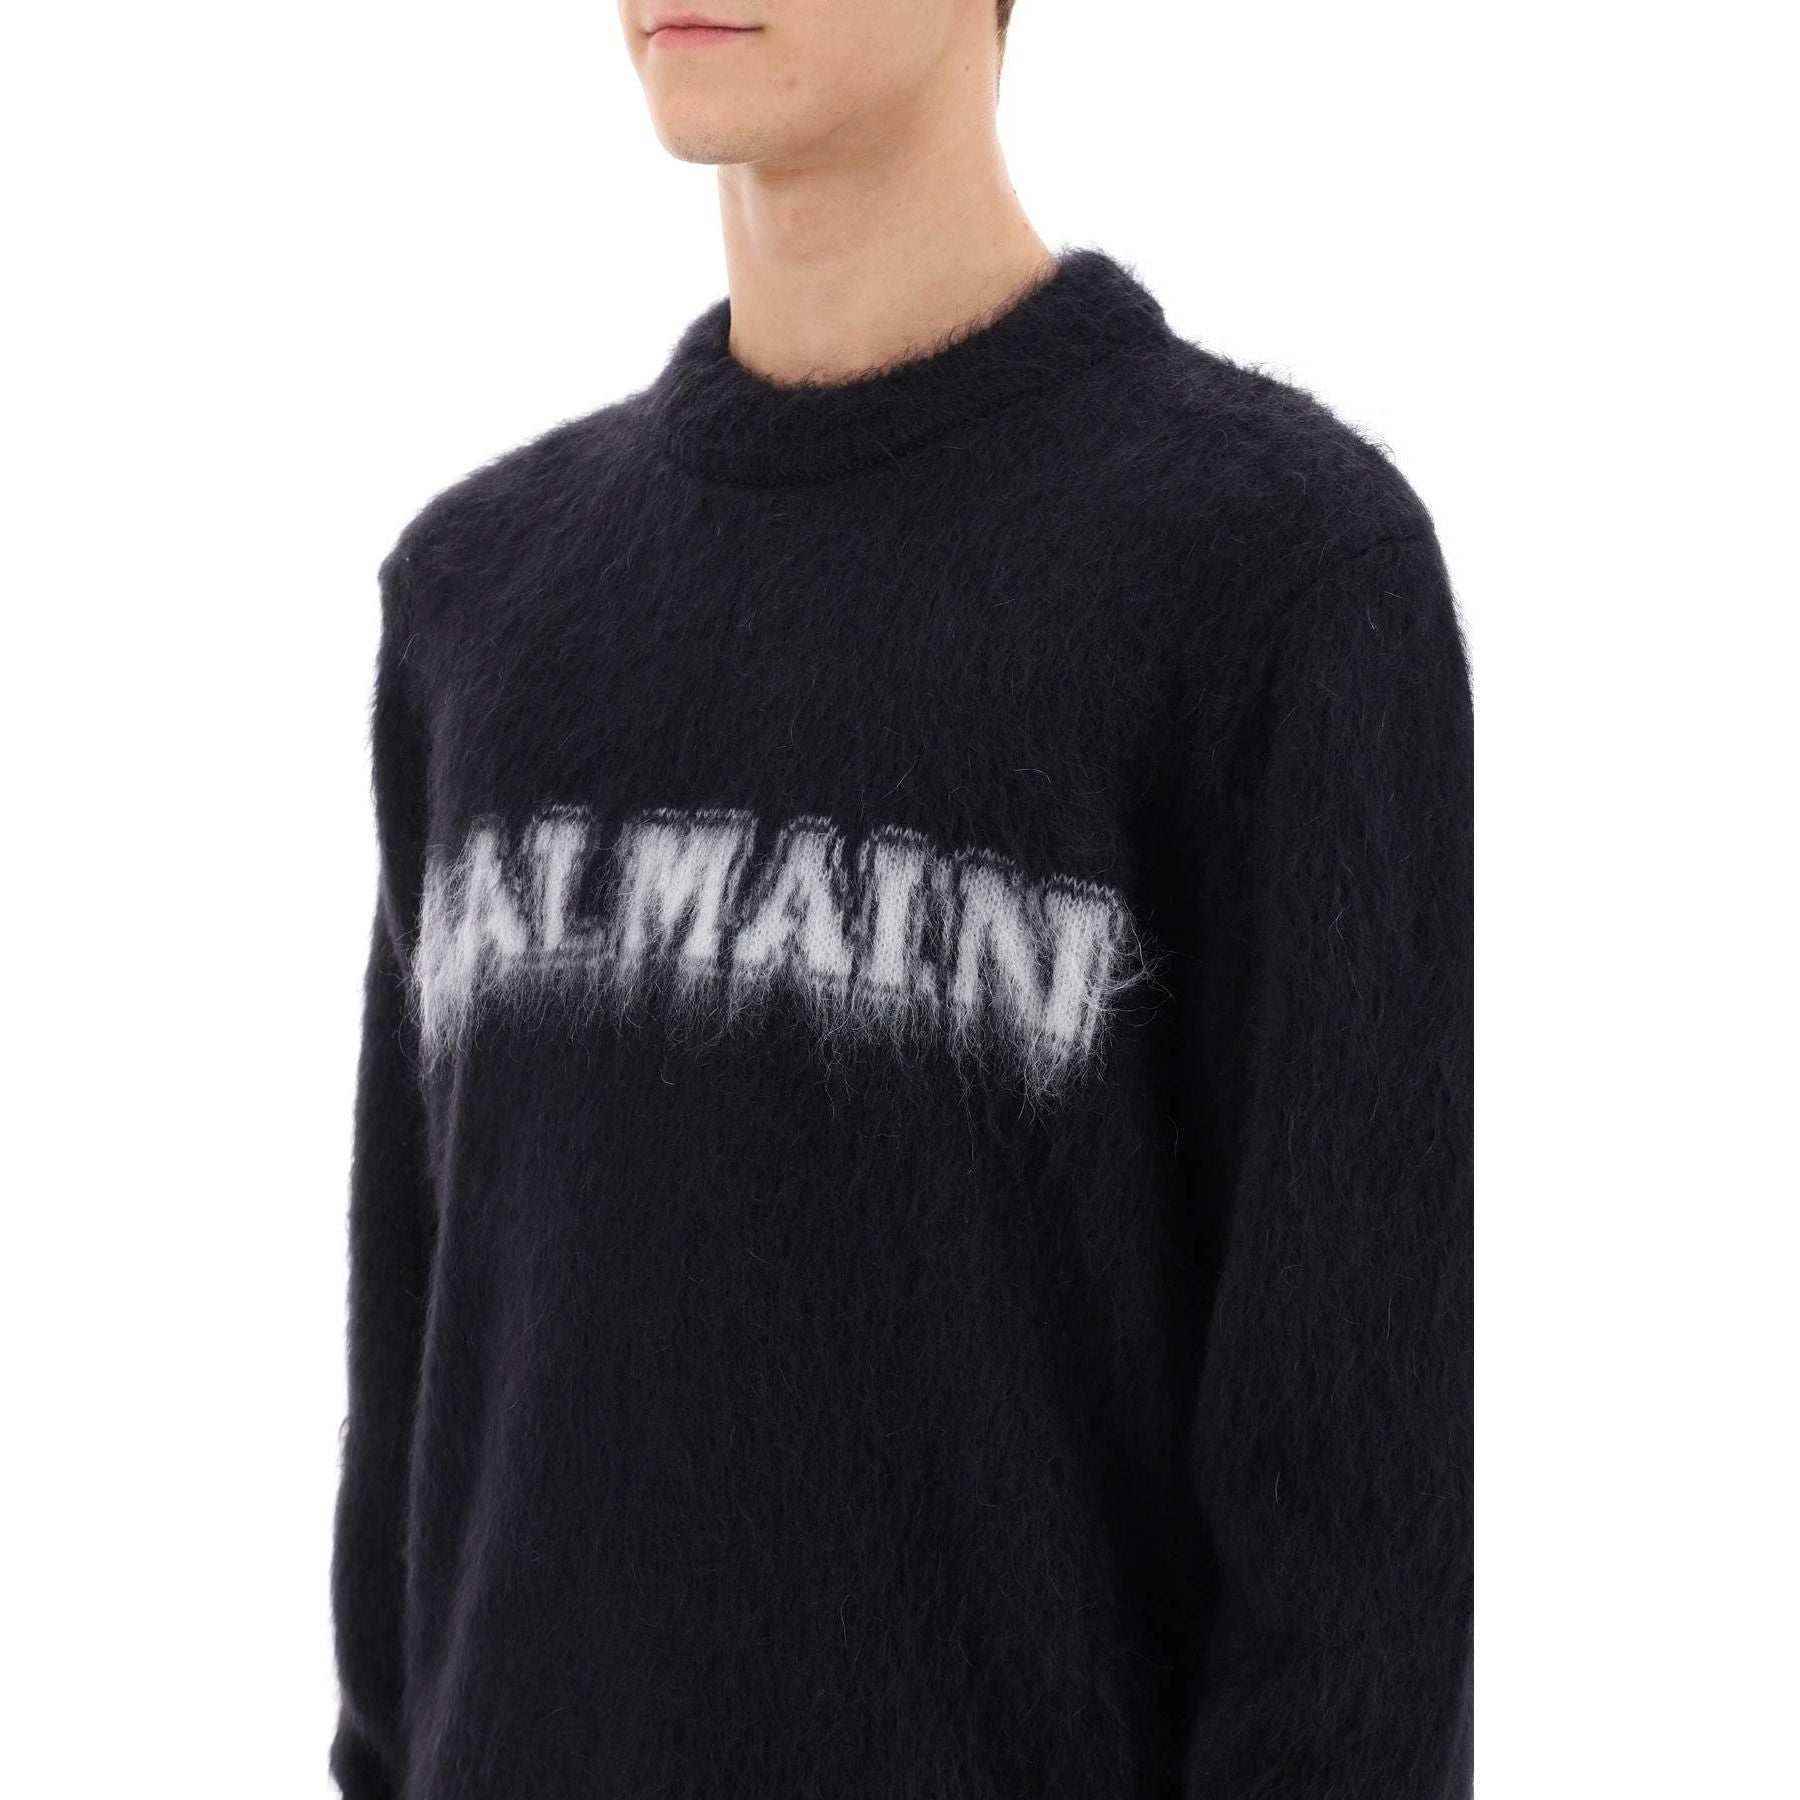 Retro Brushed Mohair Pullover